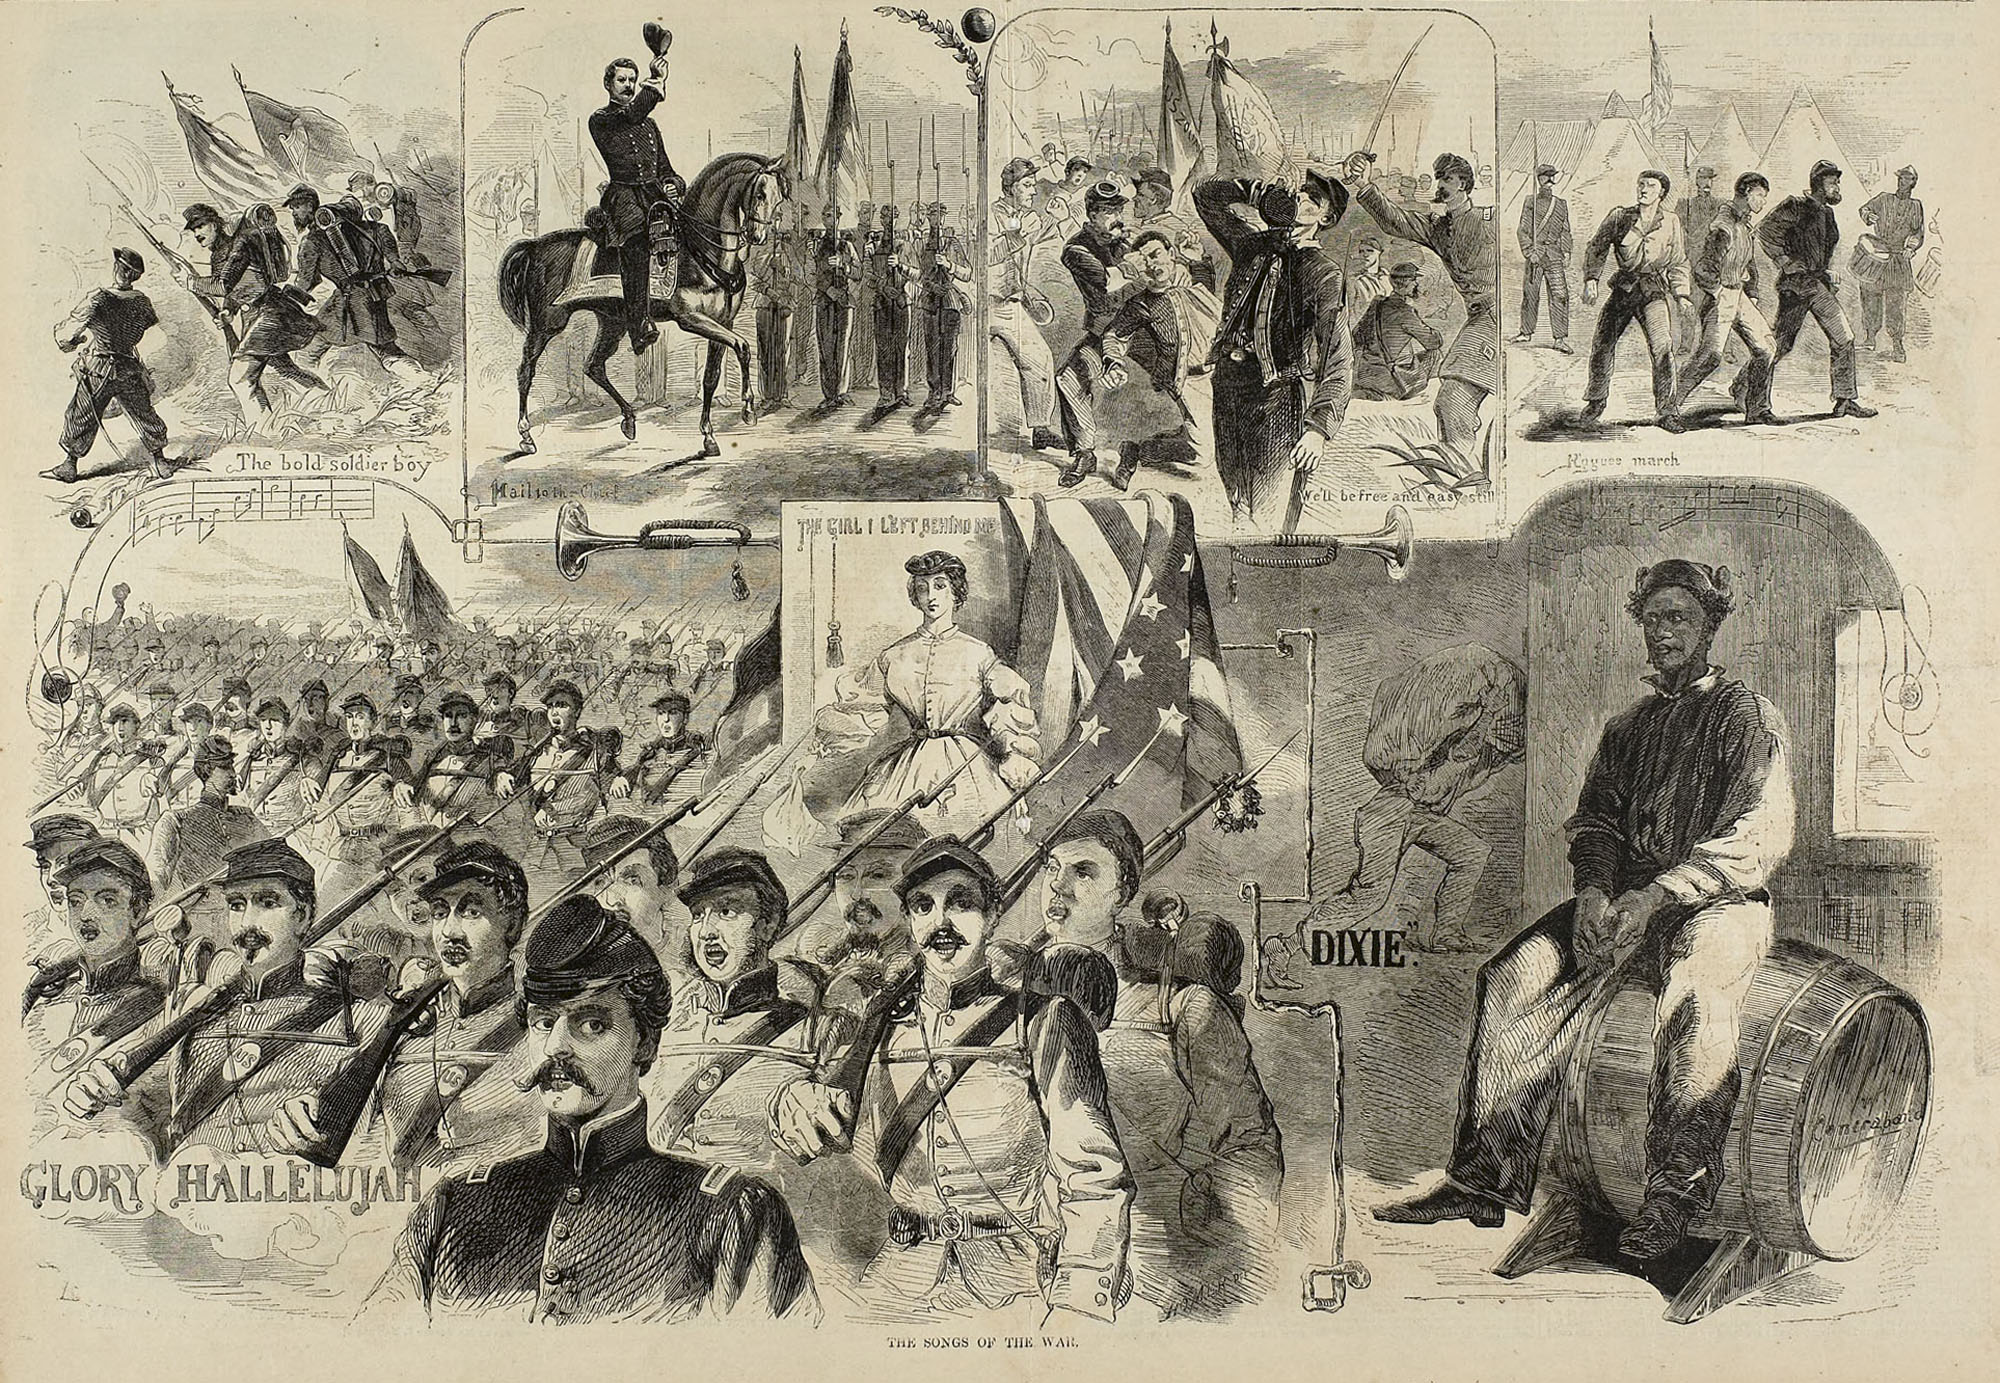 Winslow Homer, The Songs of the War, 1861, wood engraving published by Harper's Weekly November 23, 1861, 13 3/4 x 20 1/16 inches (The Art Institute of Chicago)